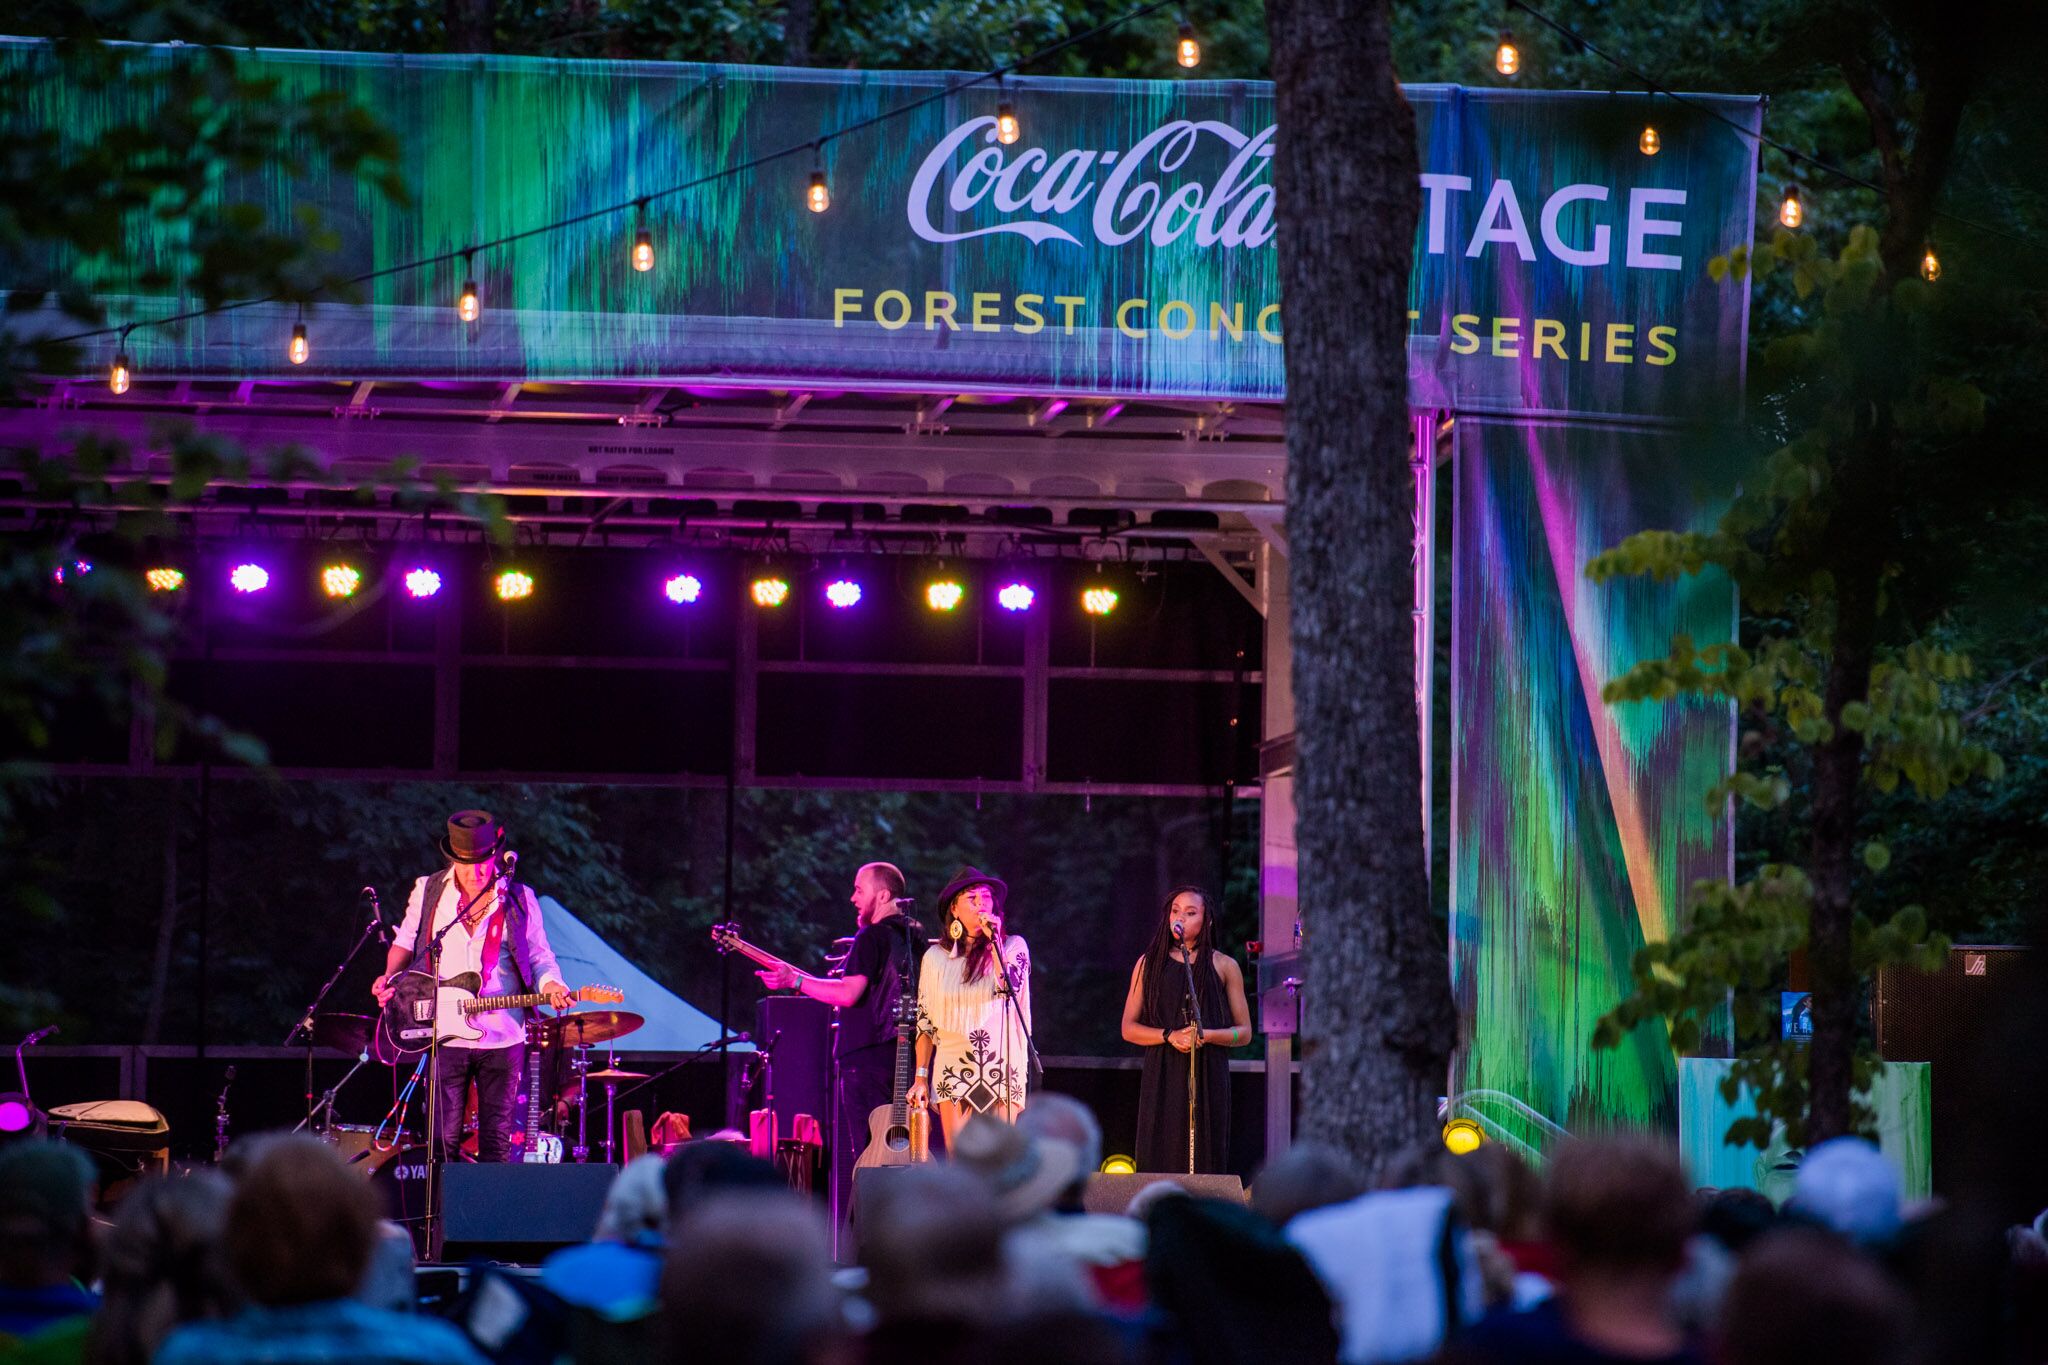 Summer evening magic with Crystal Bridges' Forest Concert Series THE